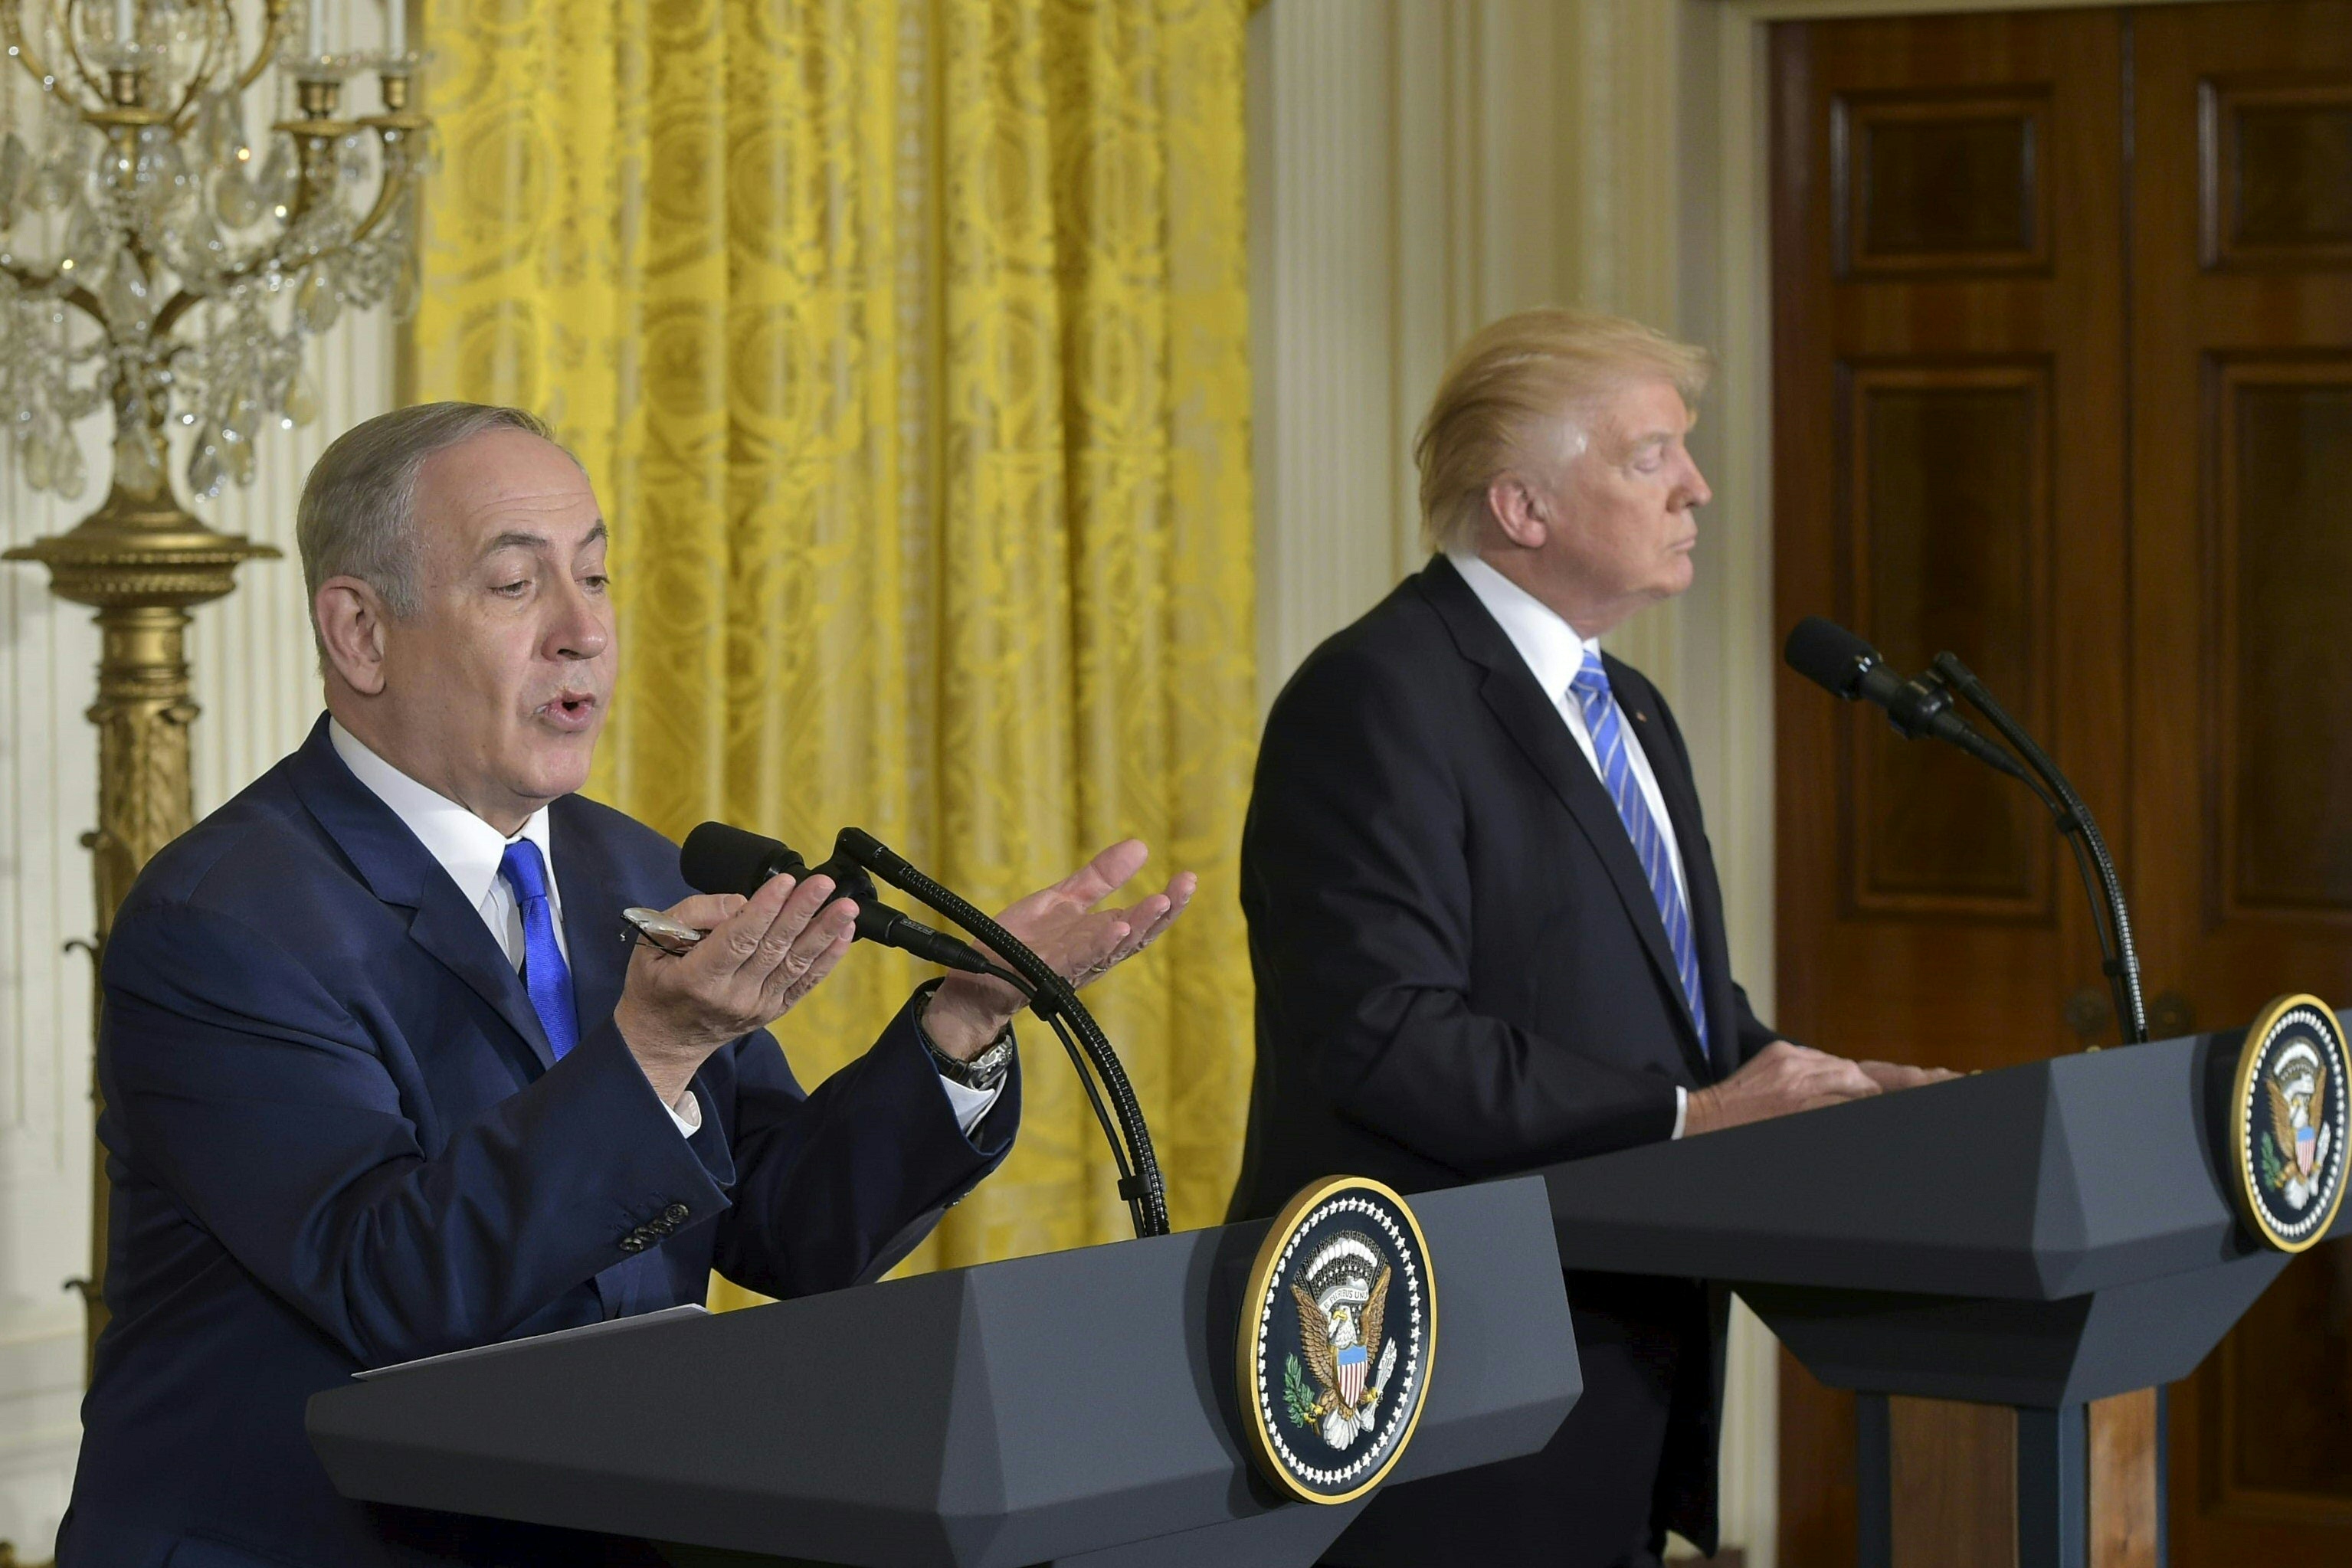 Meeting Israel's Netanyahu, Trump avoids commitment to two-state solution